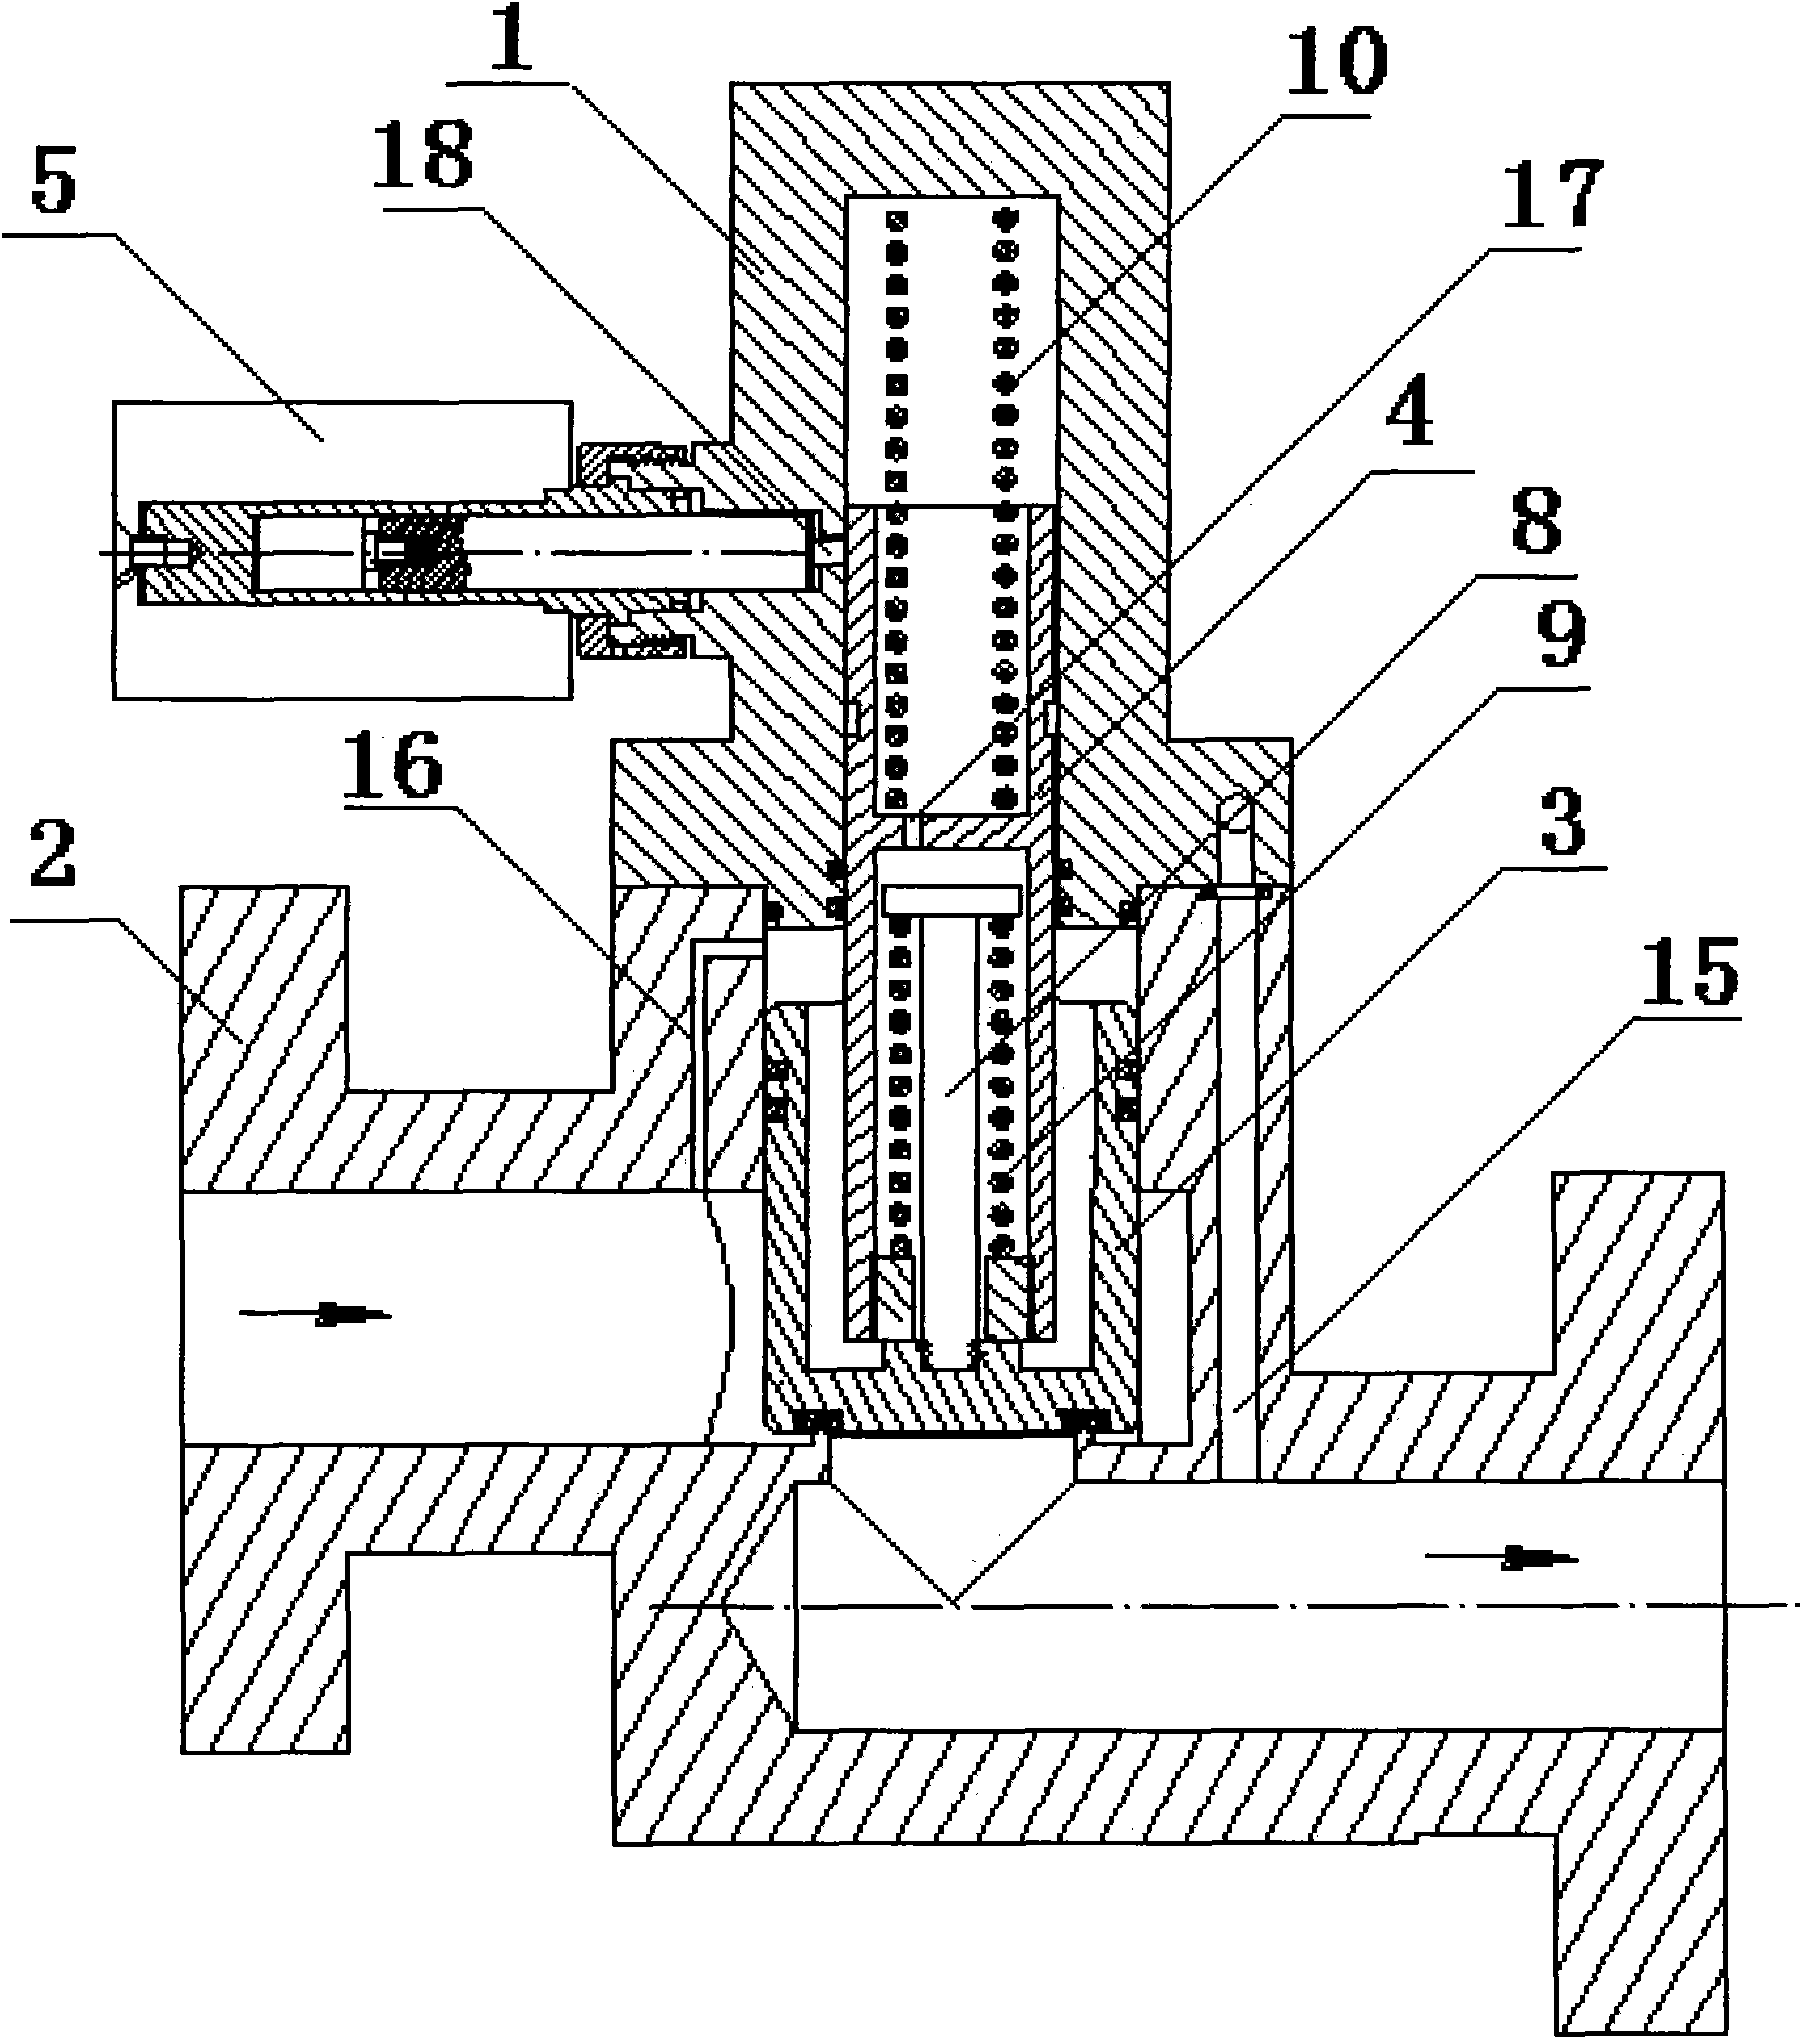 Pilot-operated type self-holding electromagnetic valve for gas well mouth